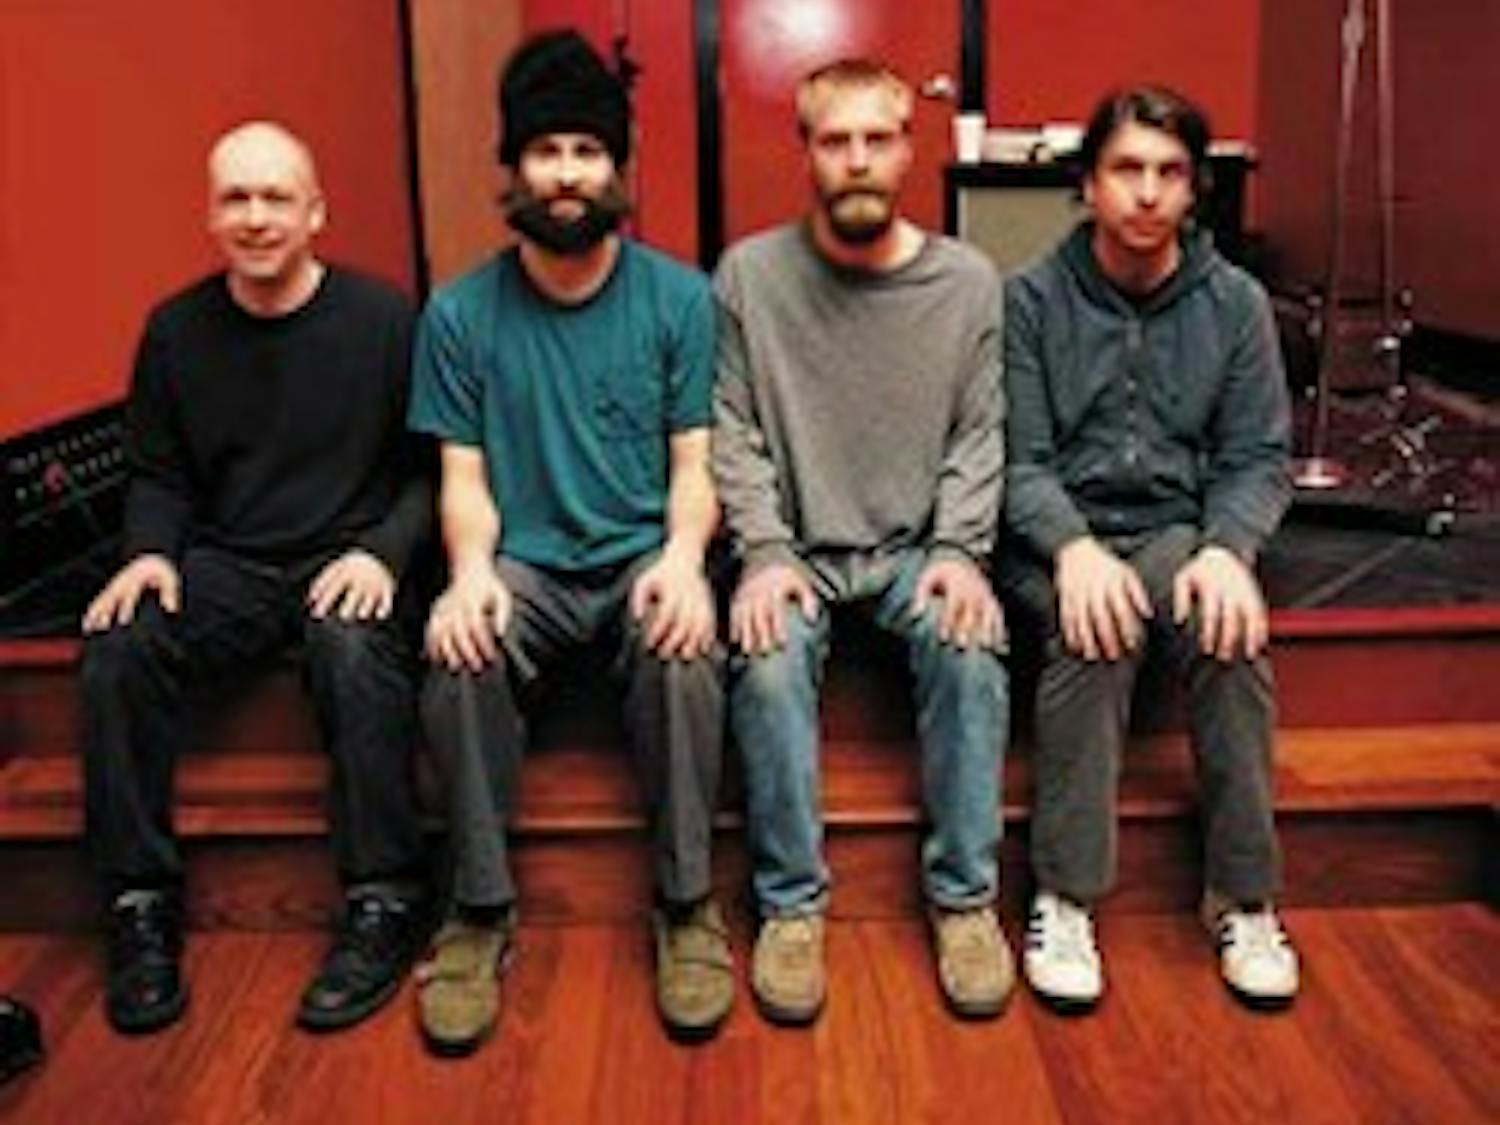 The band Built to Spill.